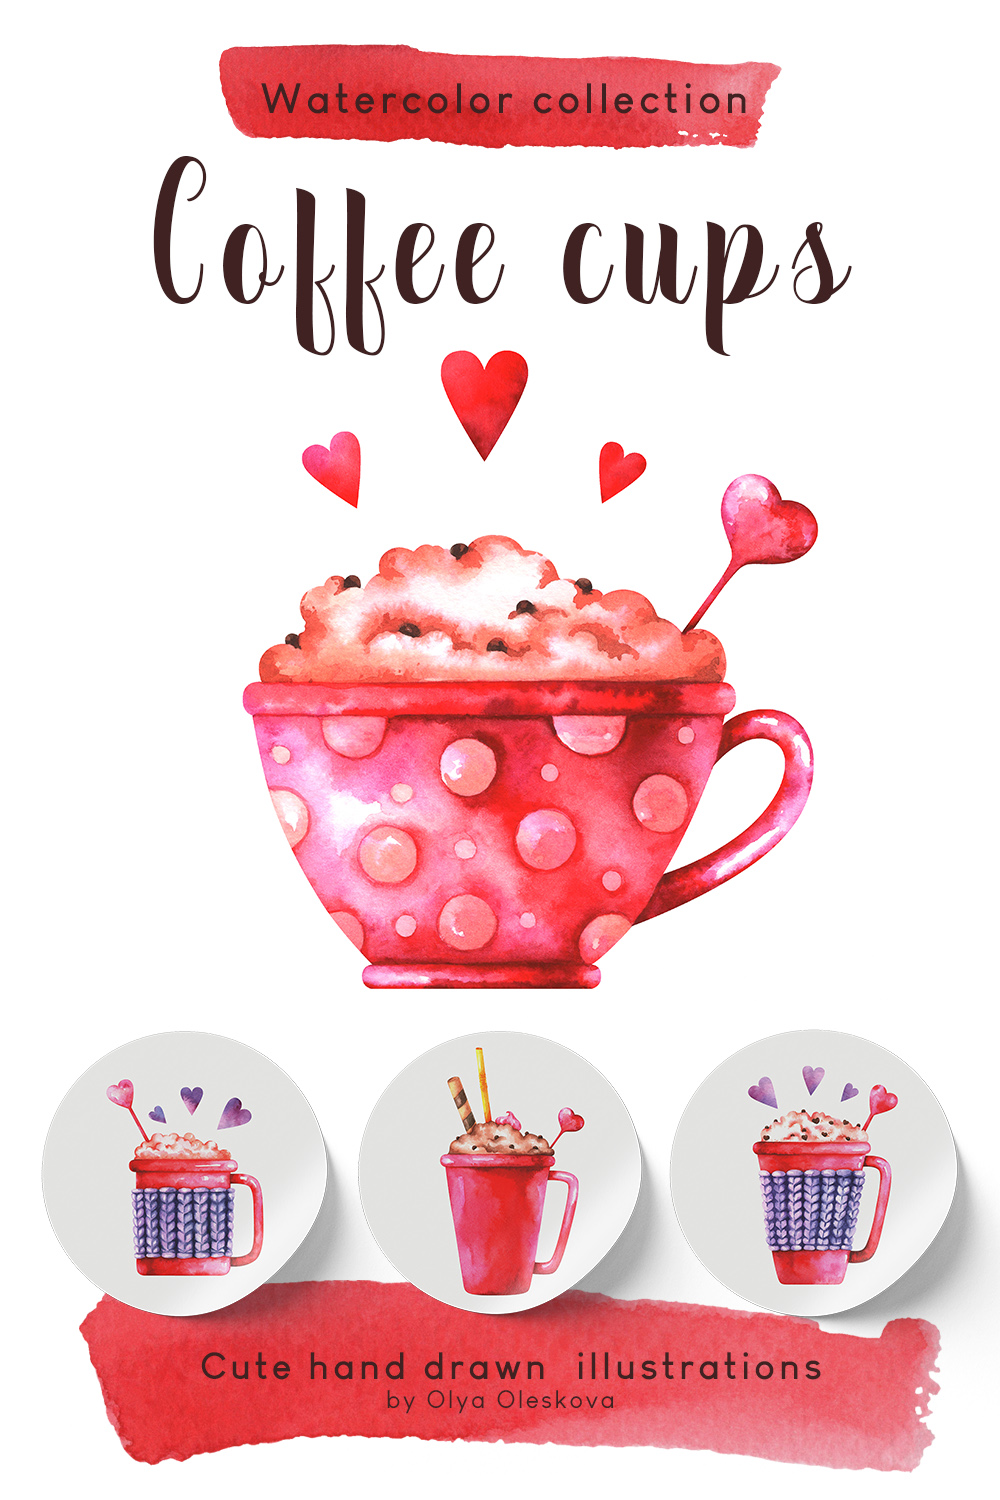 Watercolor Coffee Cups. Hand Drawn Illustrations pinterest image.